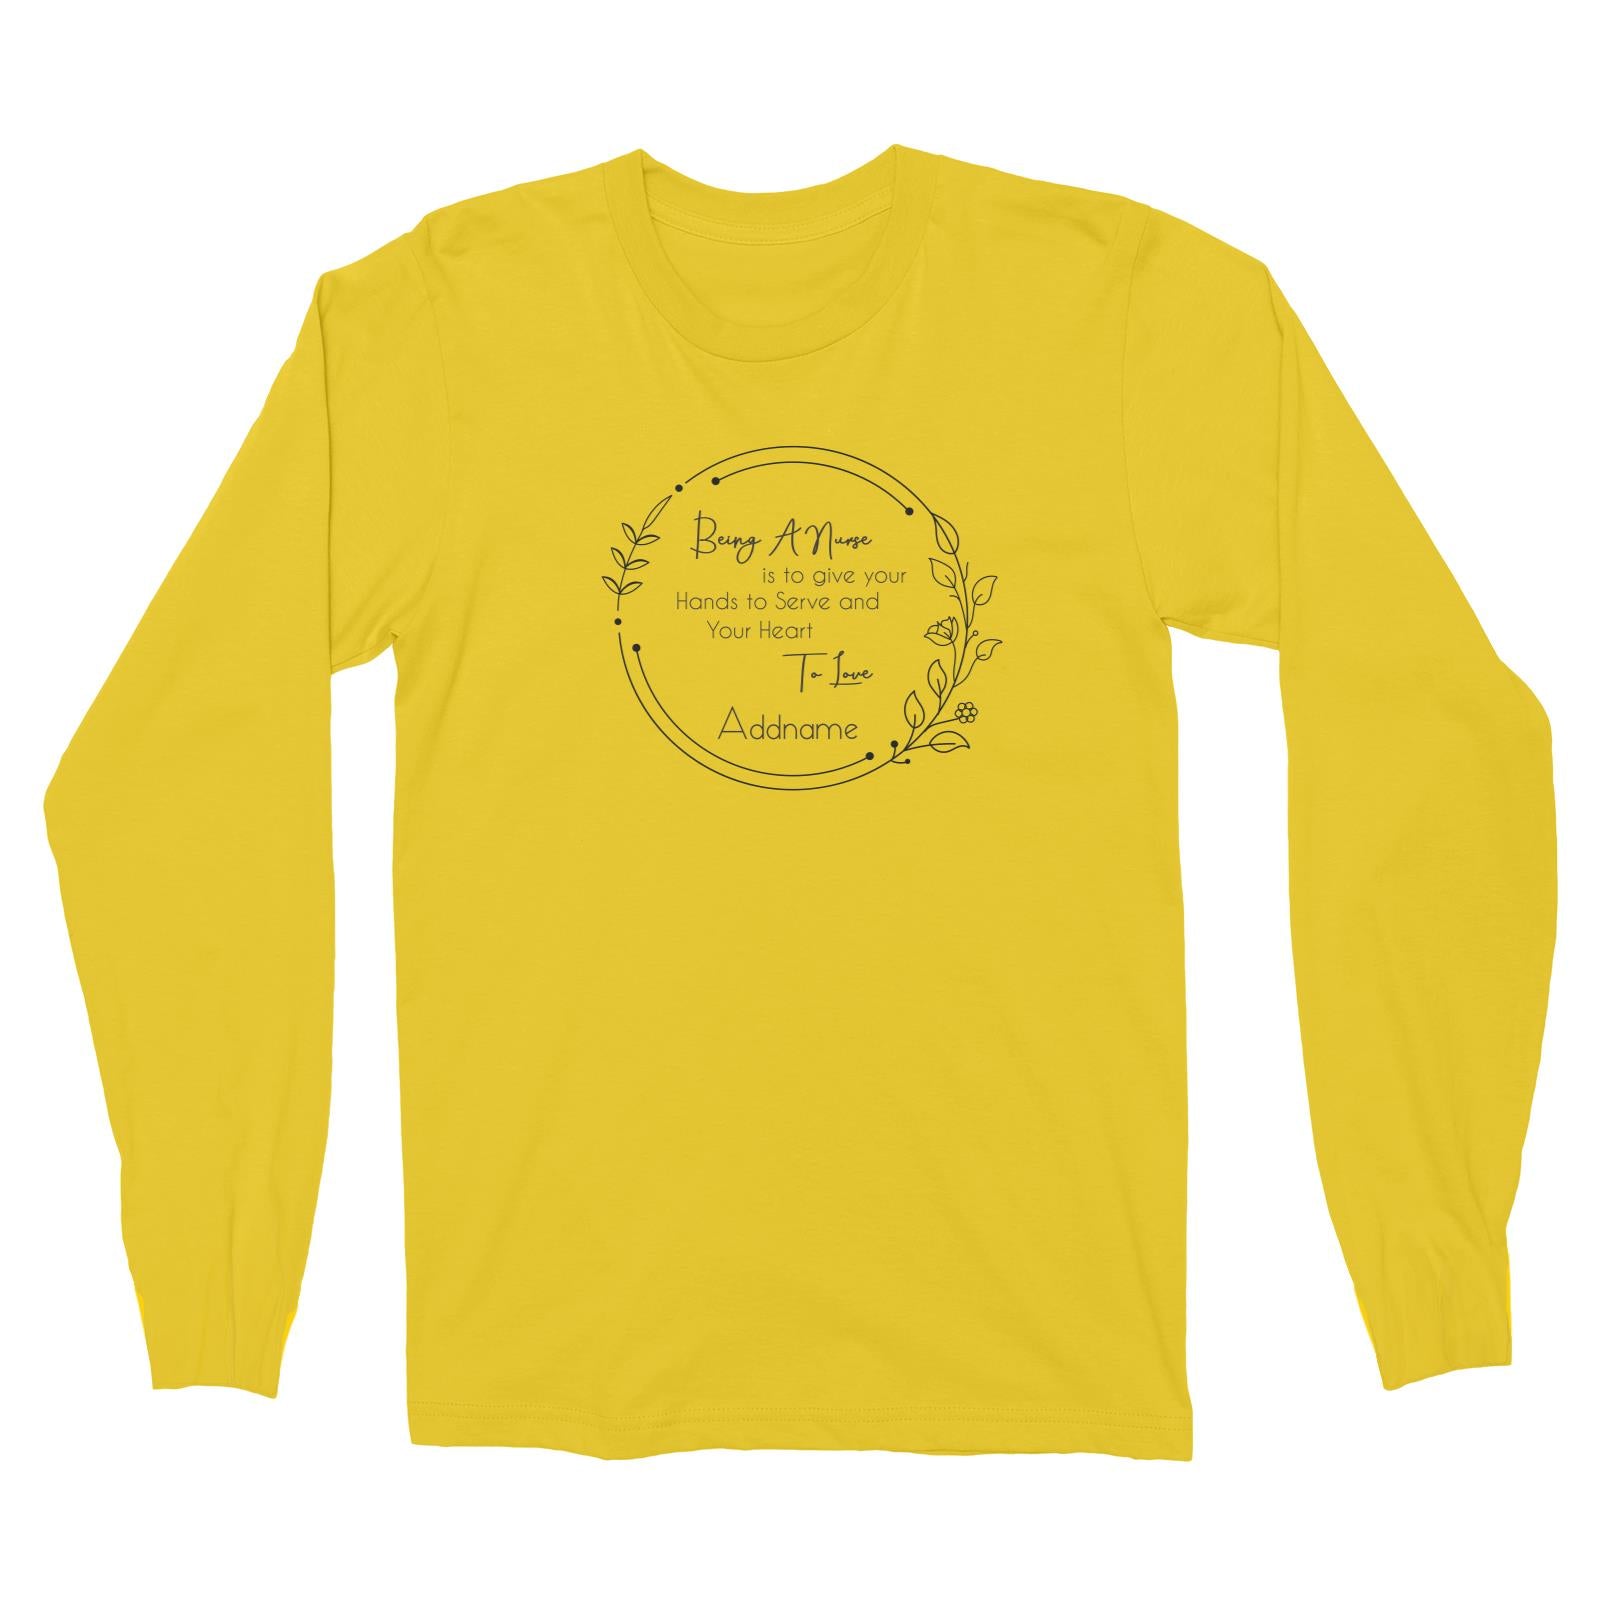 Being A Nurse is to give your Hands to Serve and Your Heart To Love Long Sleeve Unisex T-Shirt